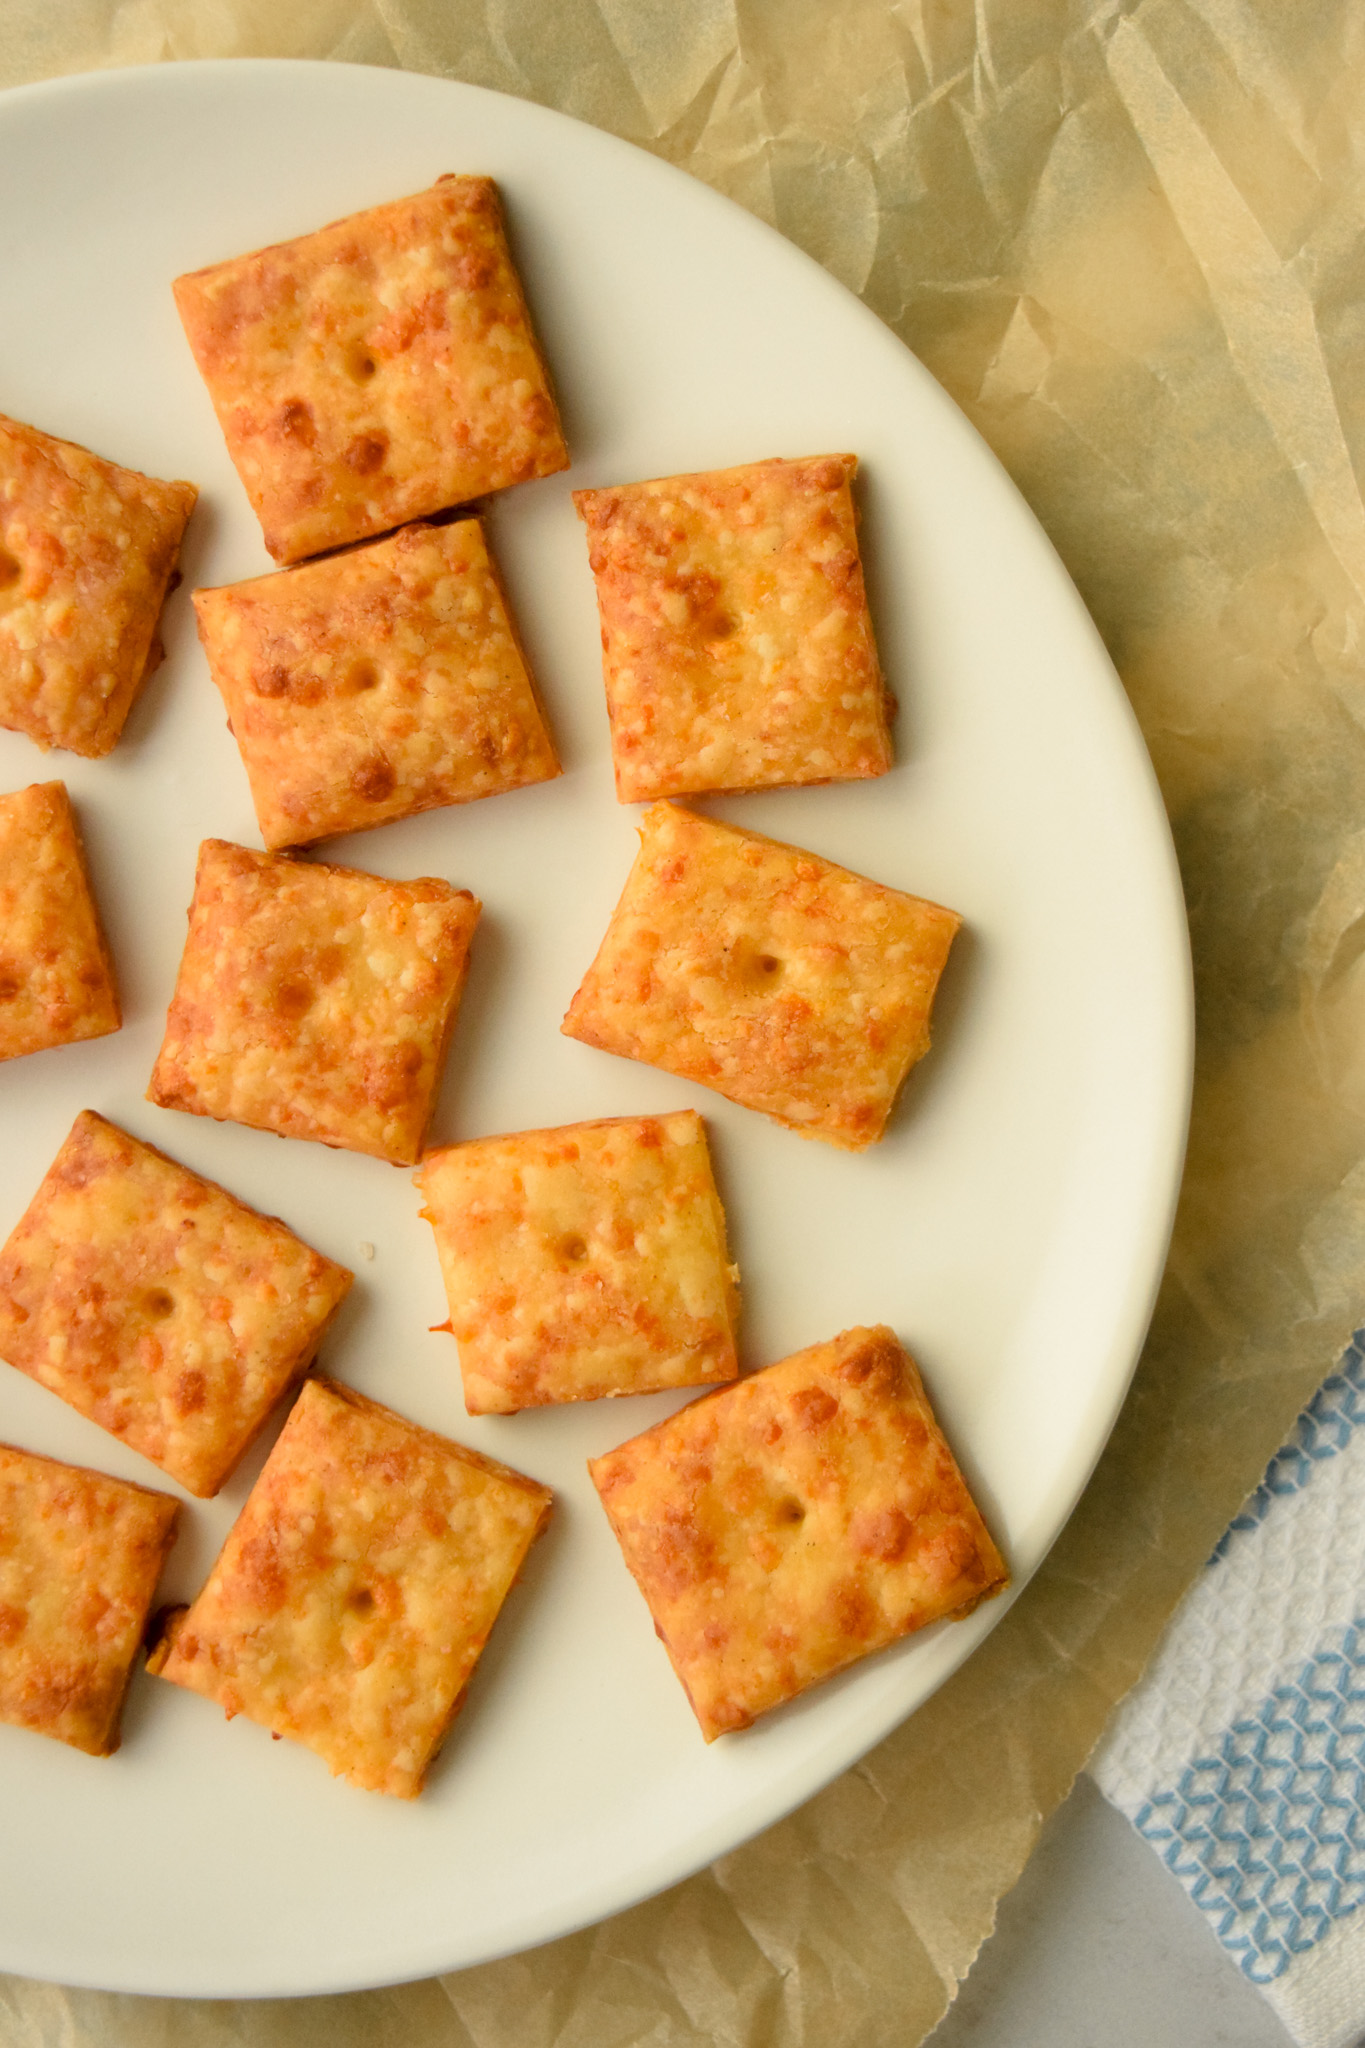 Plate full of homemade gluten free Cheez It crackers